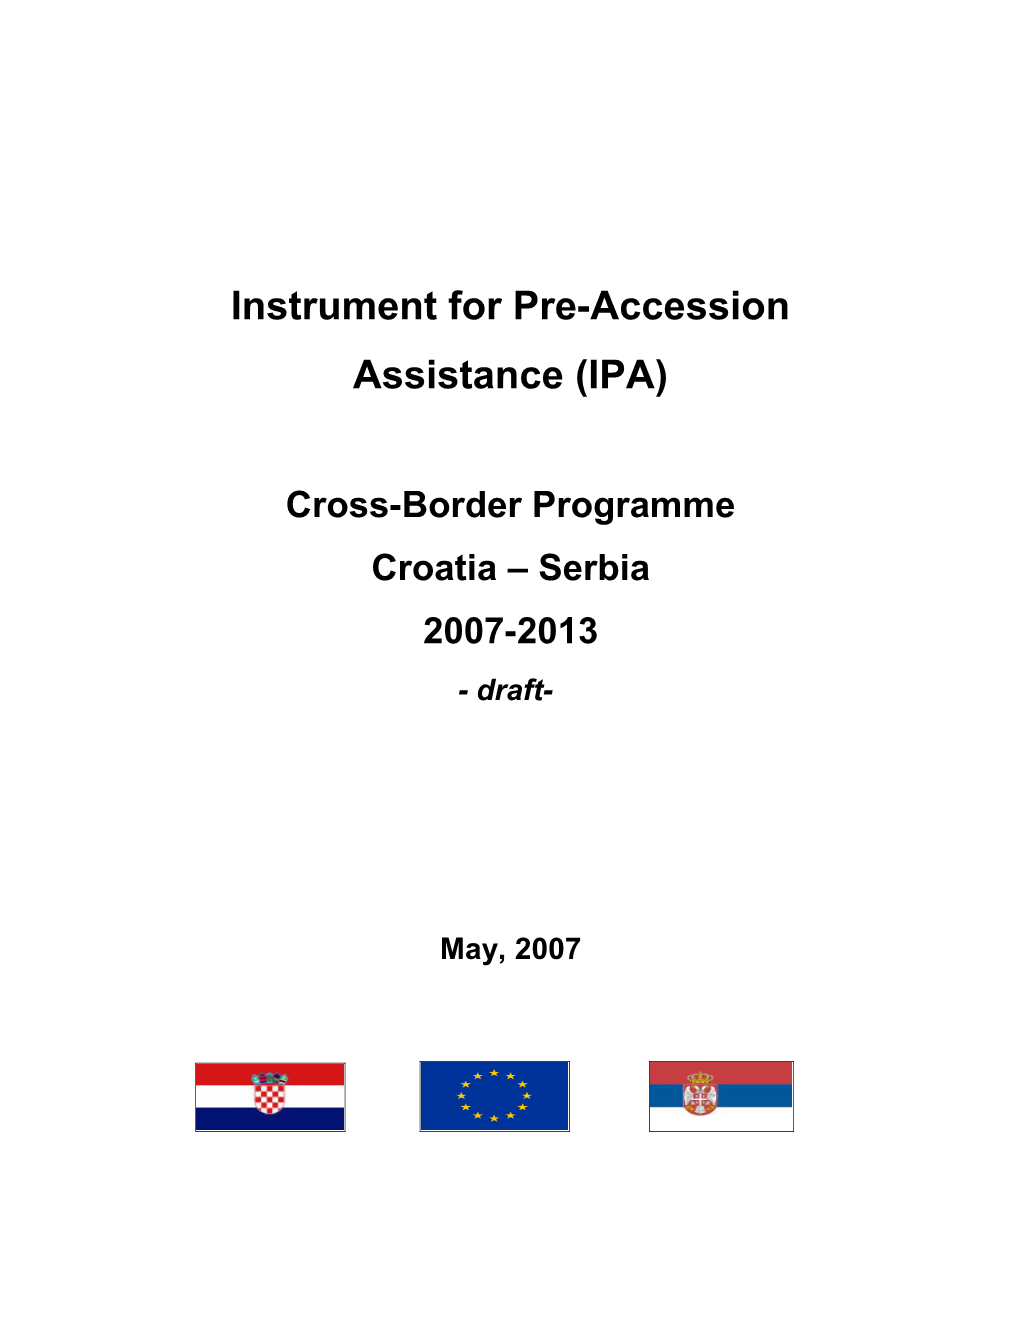 Instrument for Pre-Accession Assistance (IPA)